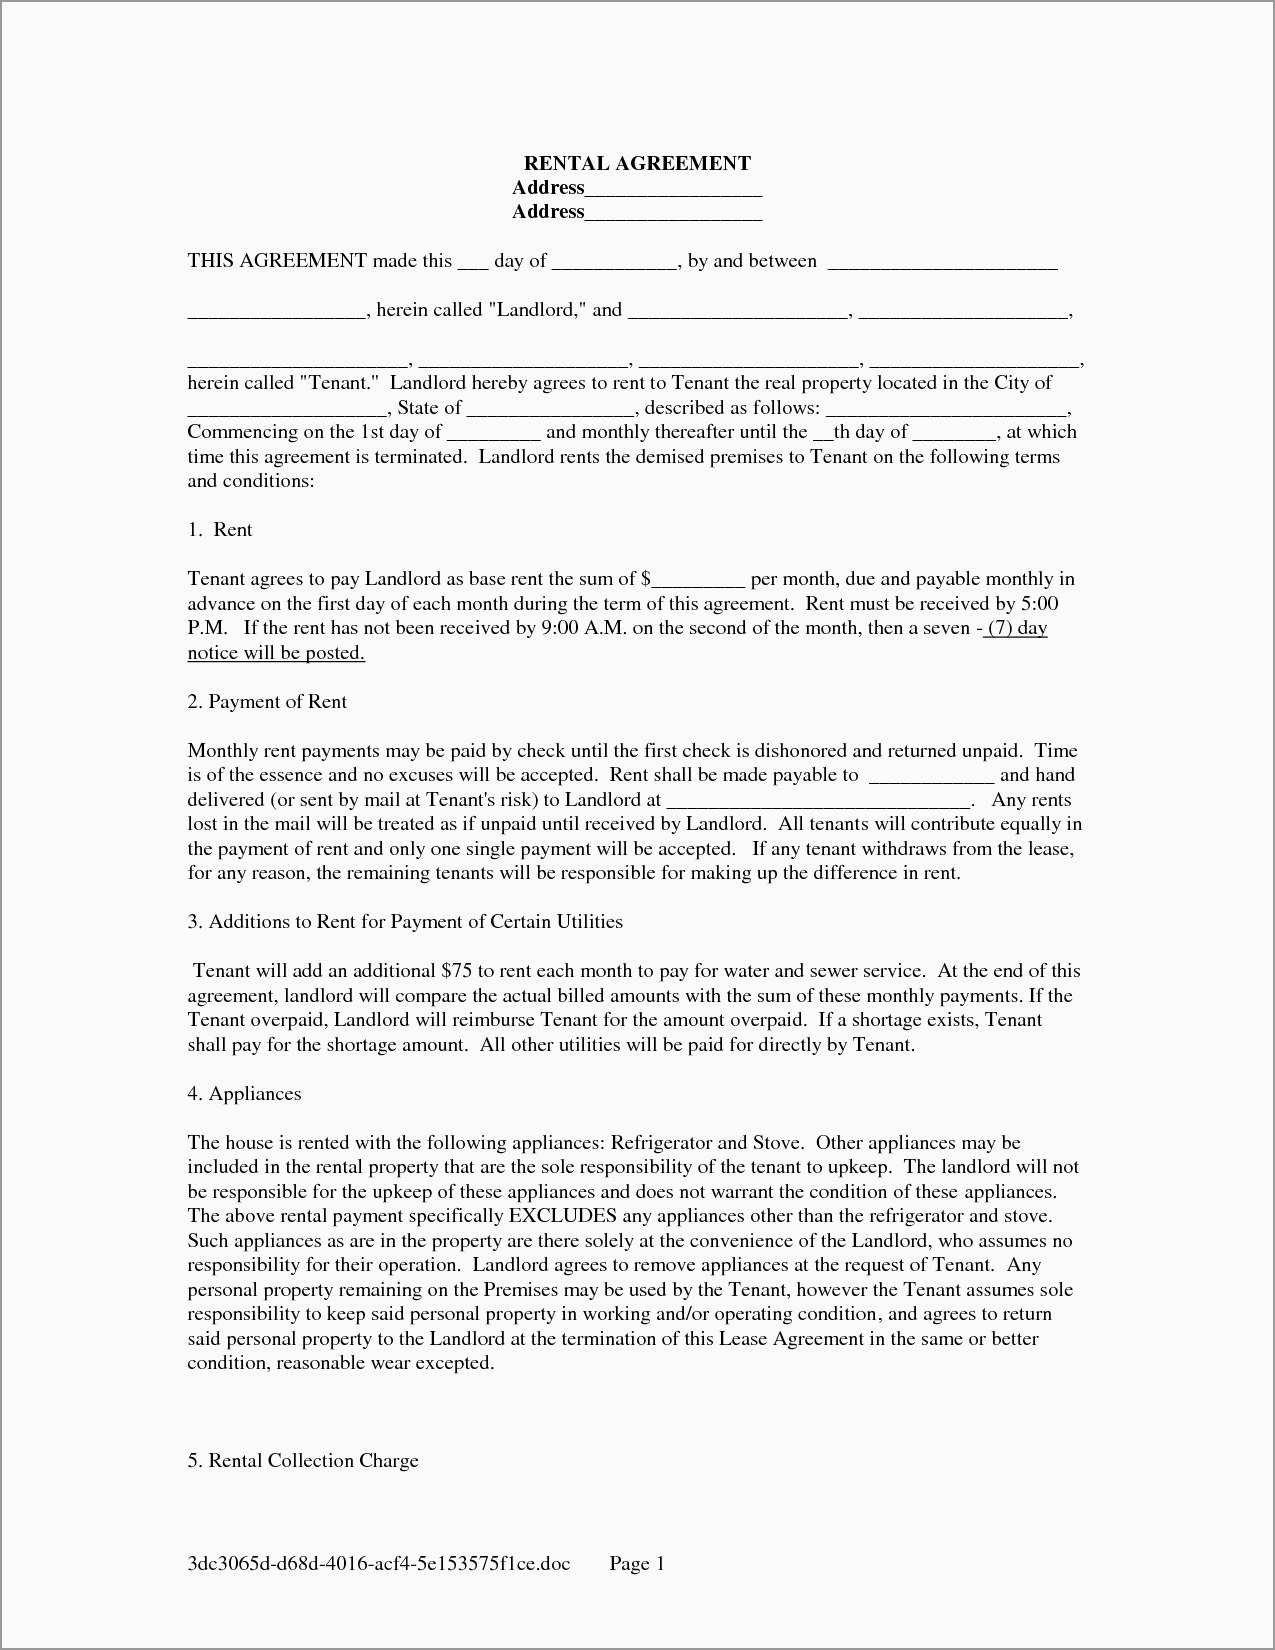 Contract Rental Agreement Template New Rental House Contract Template Free Best Of Template